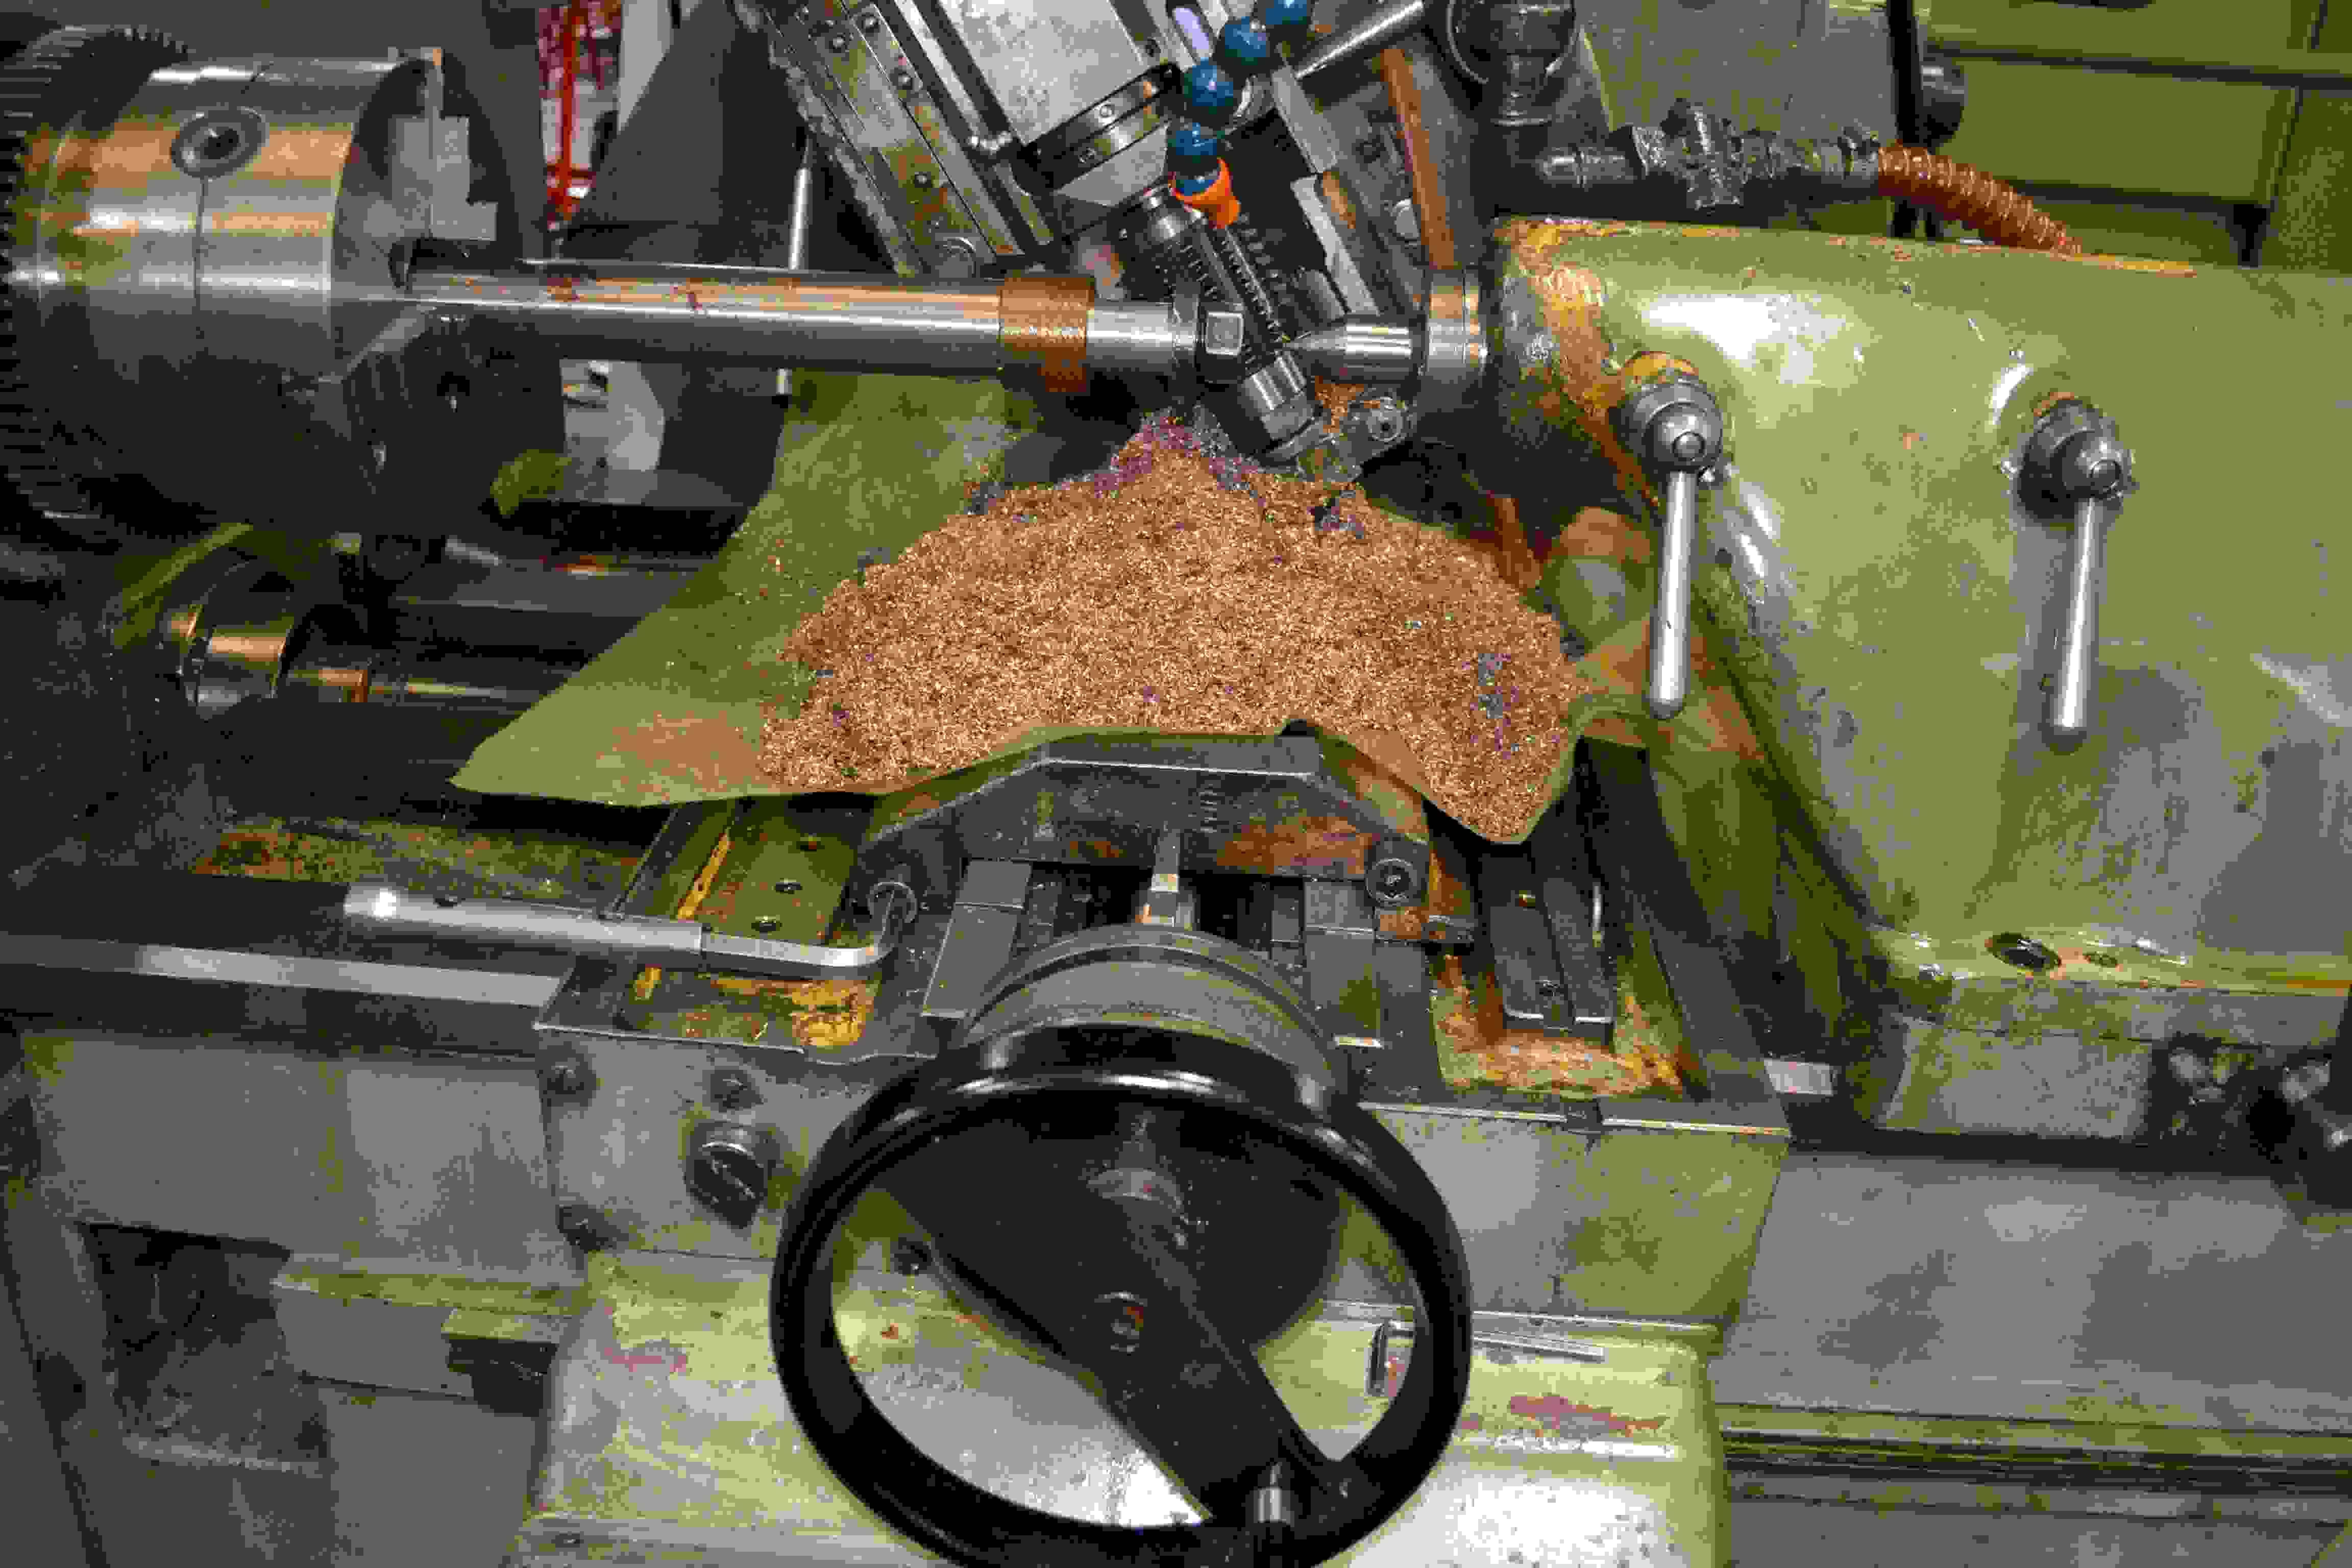 Bronze shavings from the machining process at BJ-Gear 